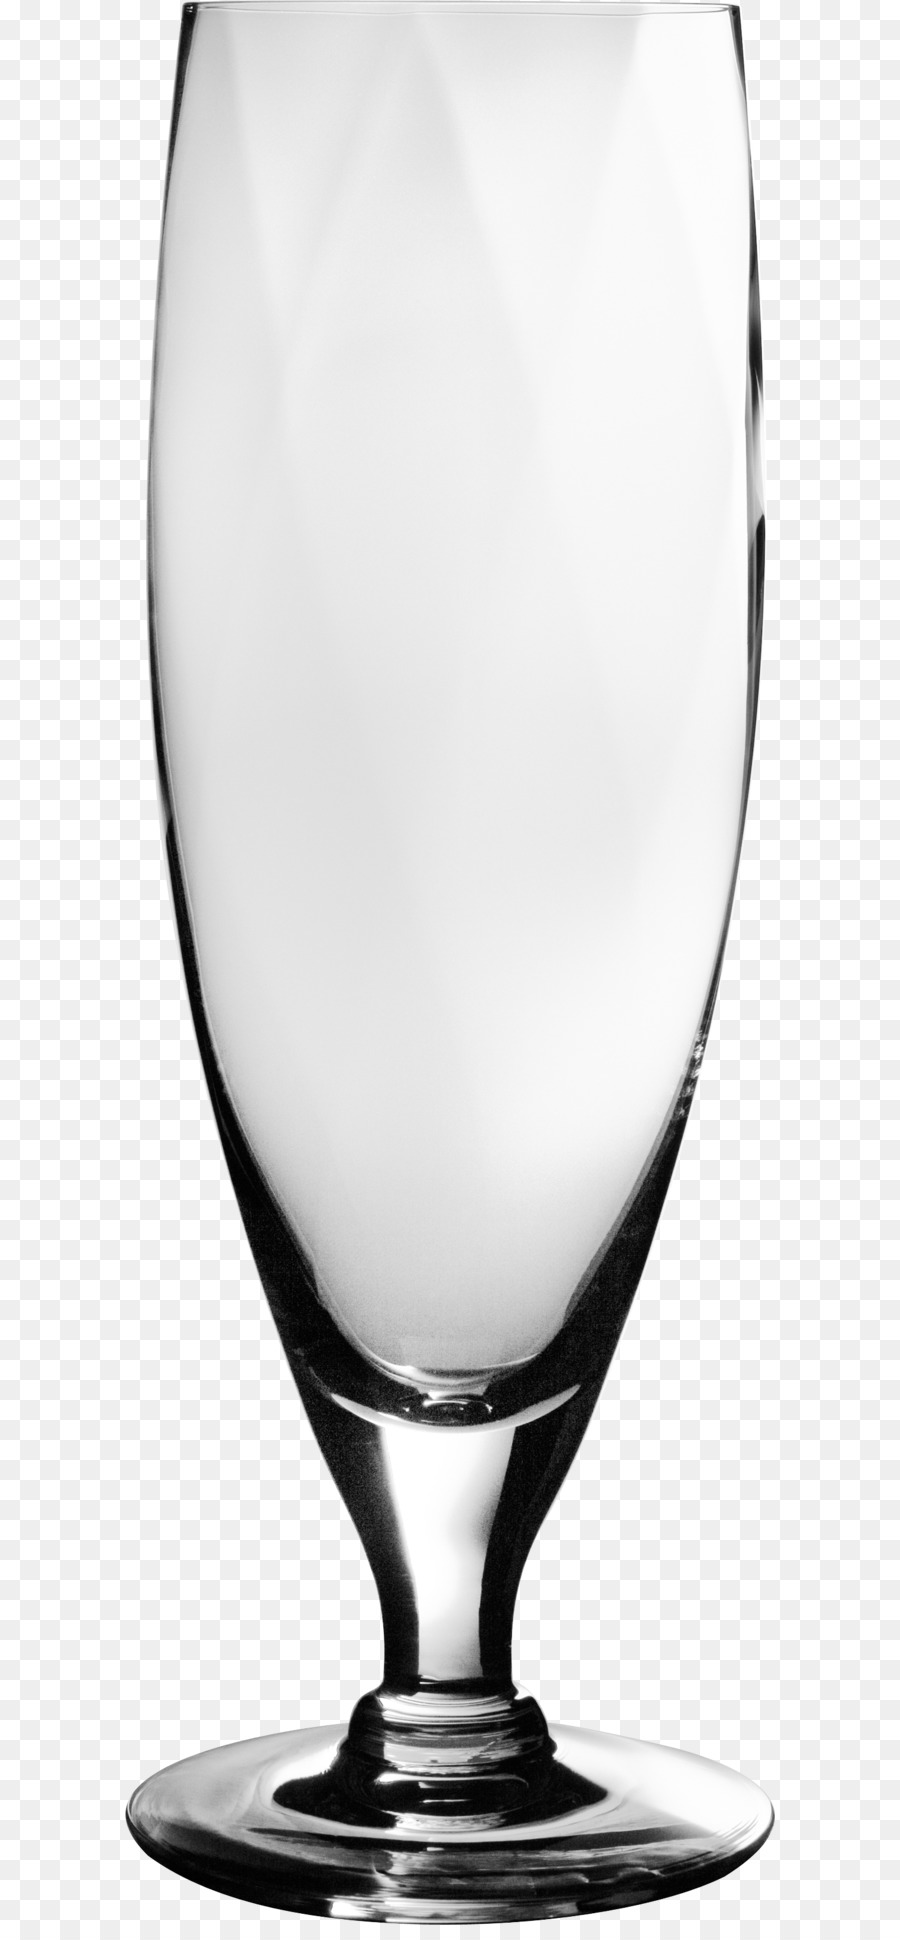 Glass - Empty wine glass PNG image png download - 1100*3258 - Free Transparent Glass png Download.